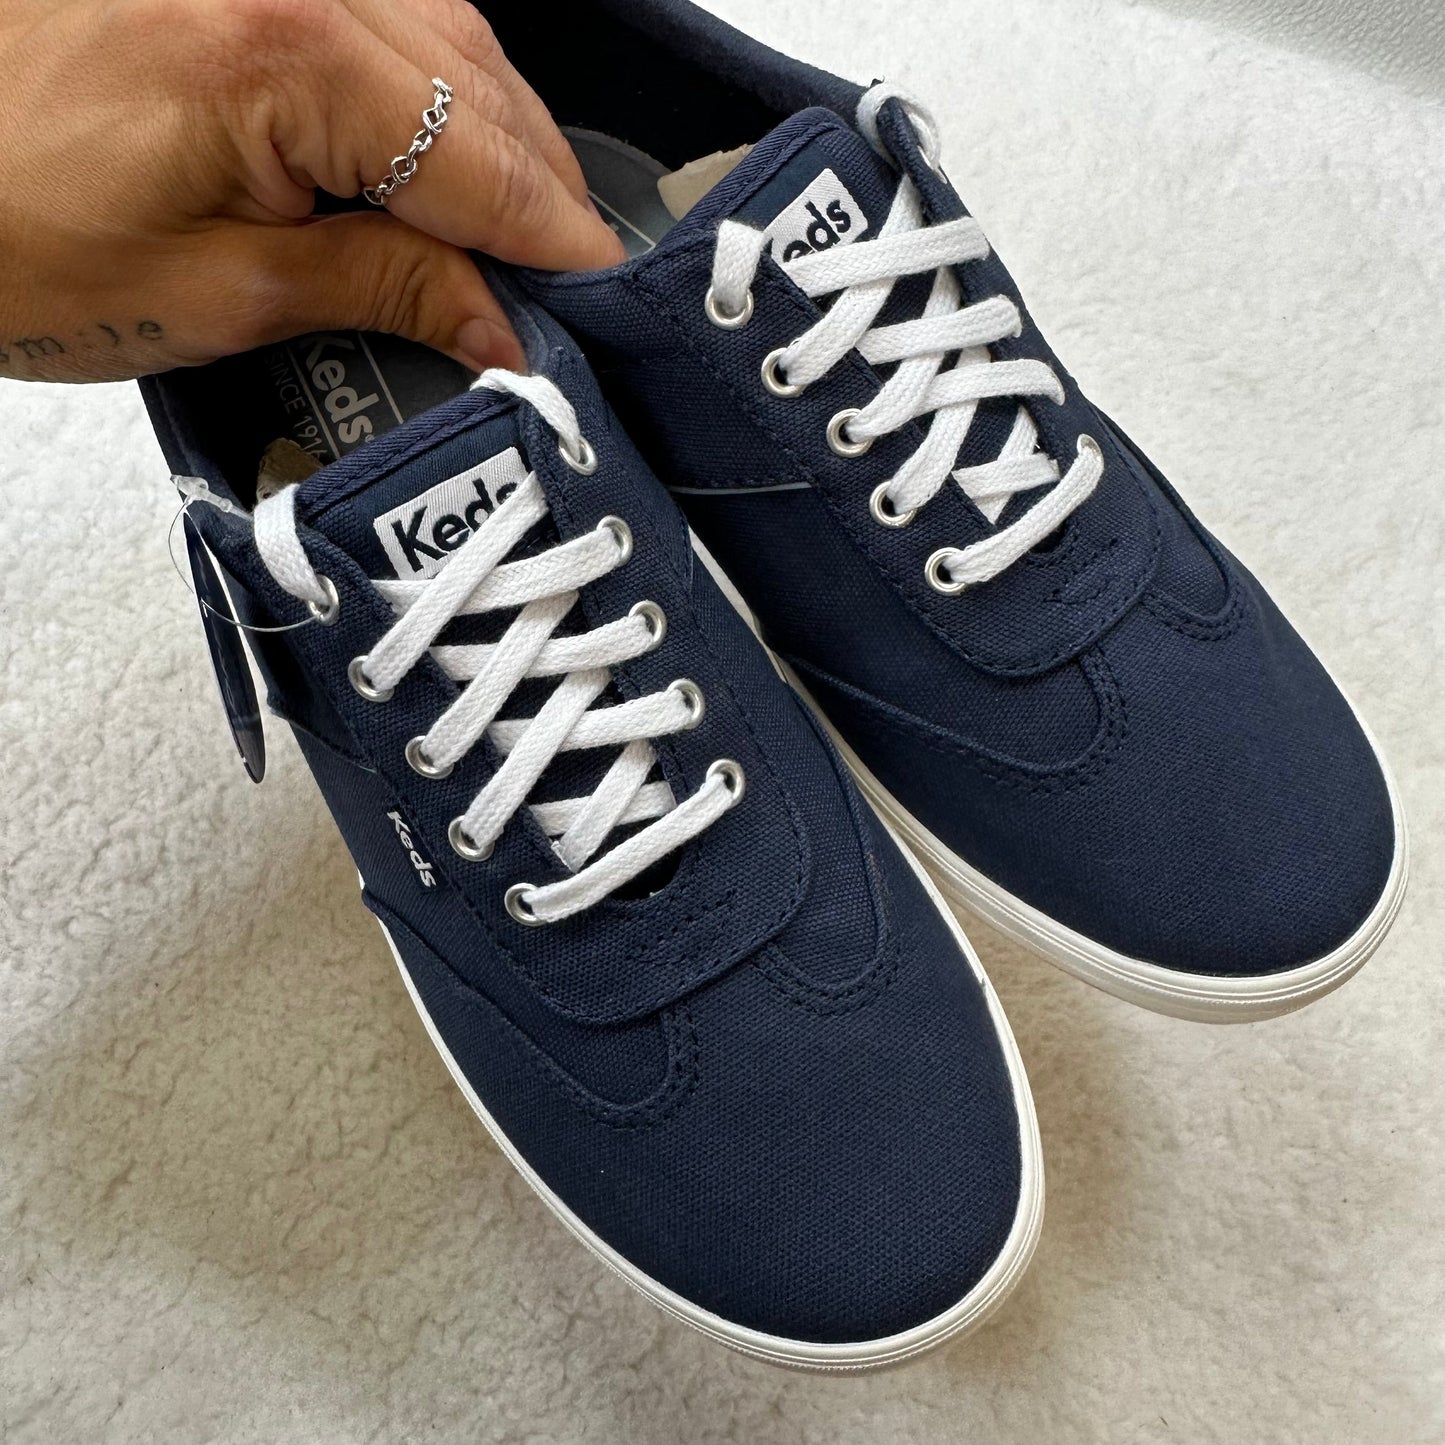 Navy Shoes Sneakers Keds, Size 7